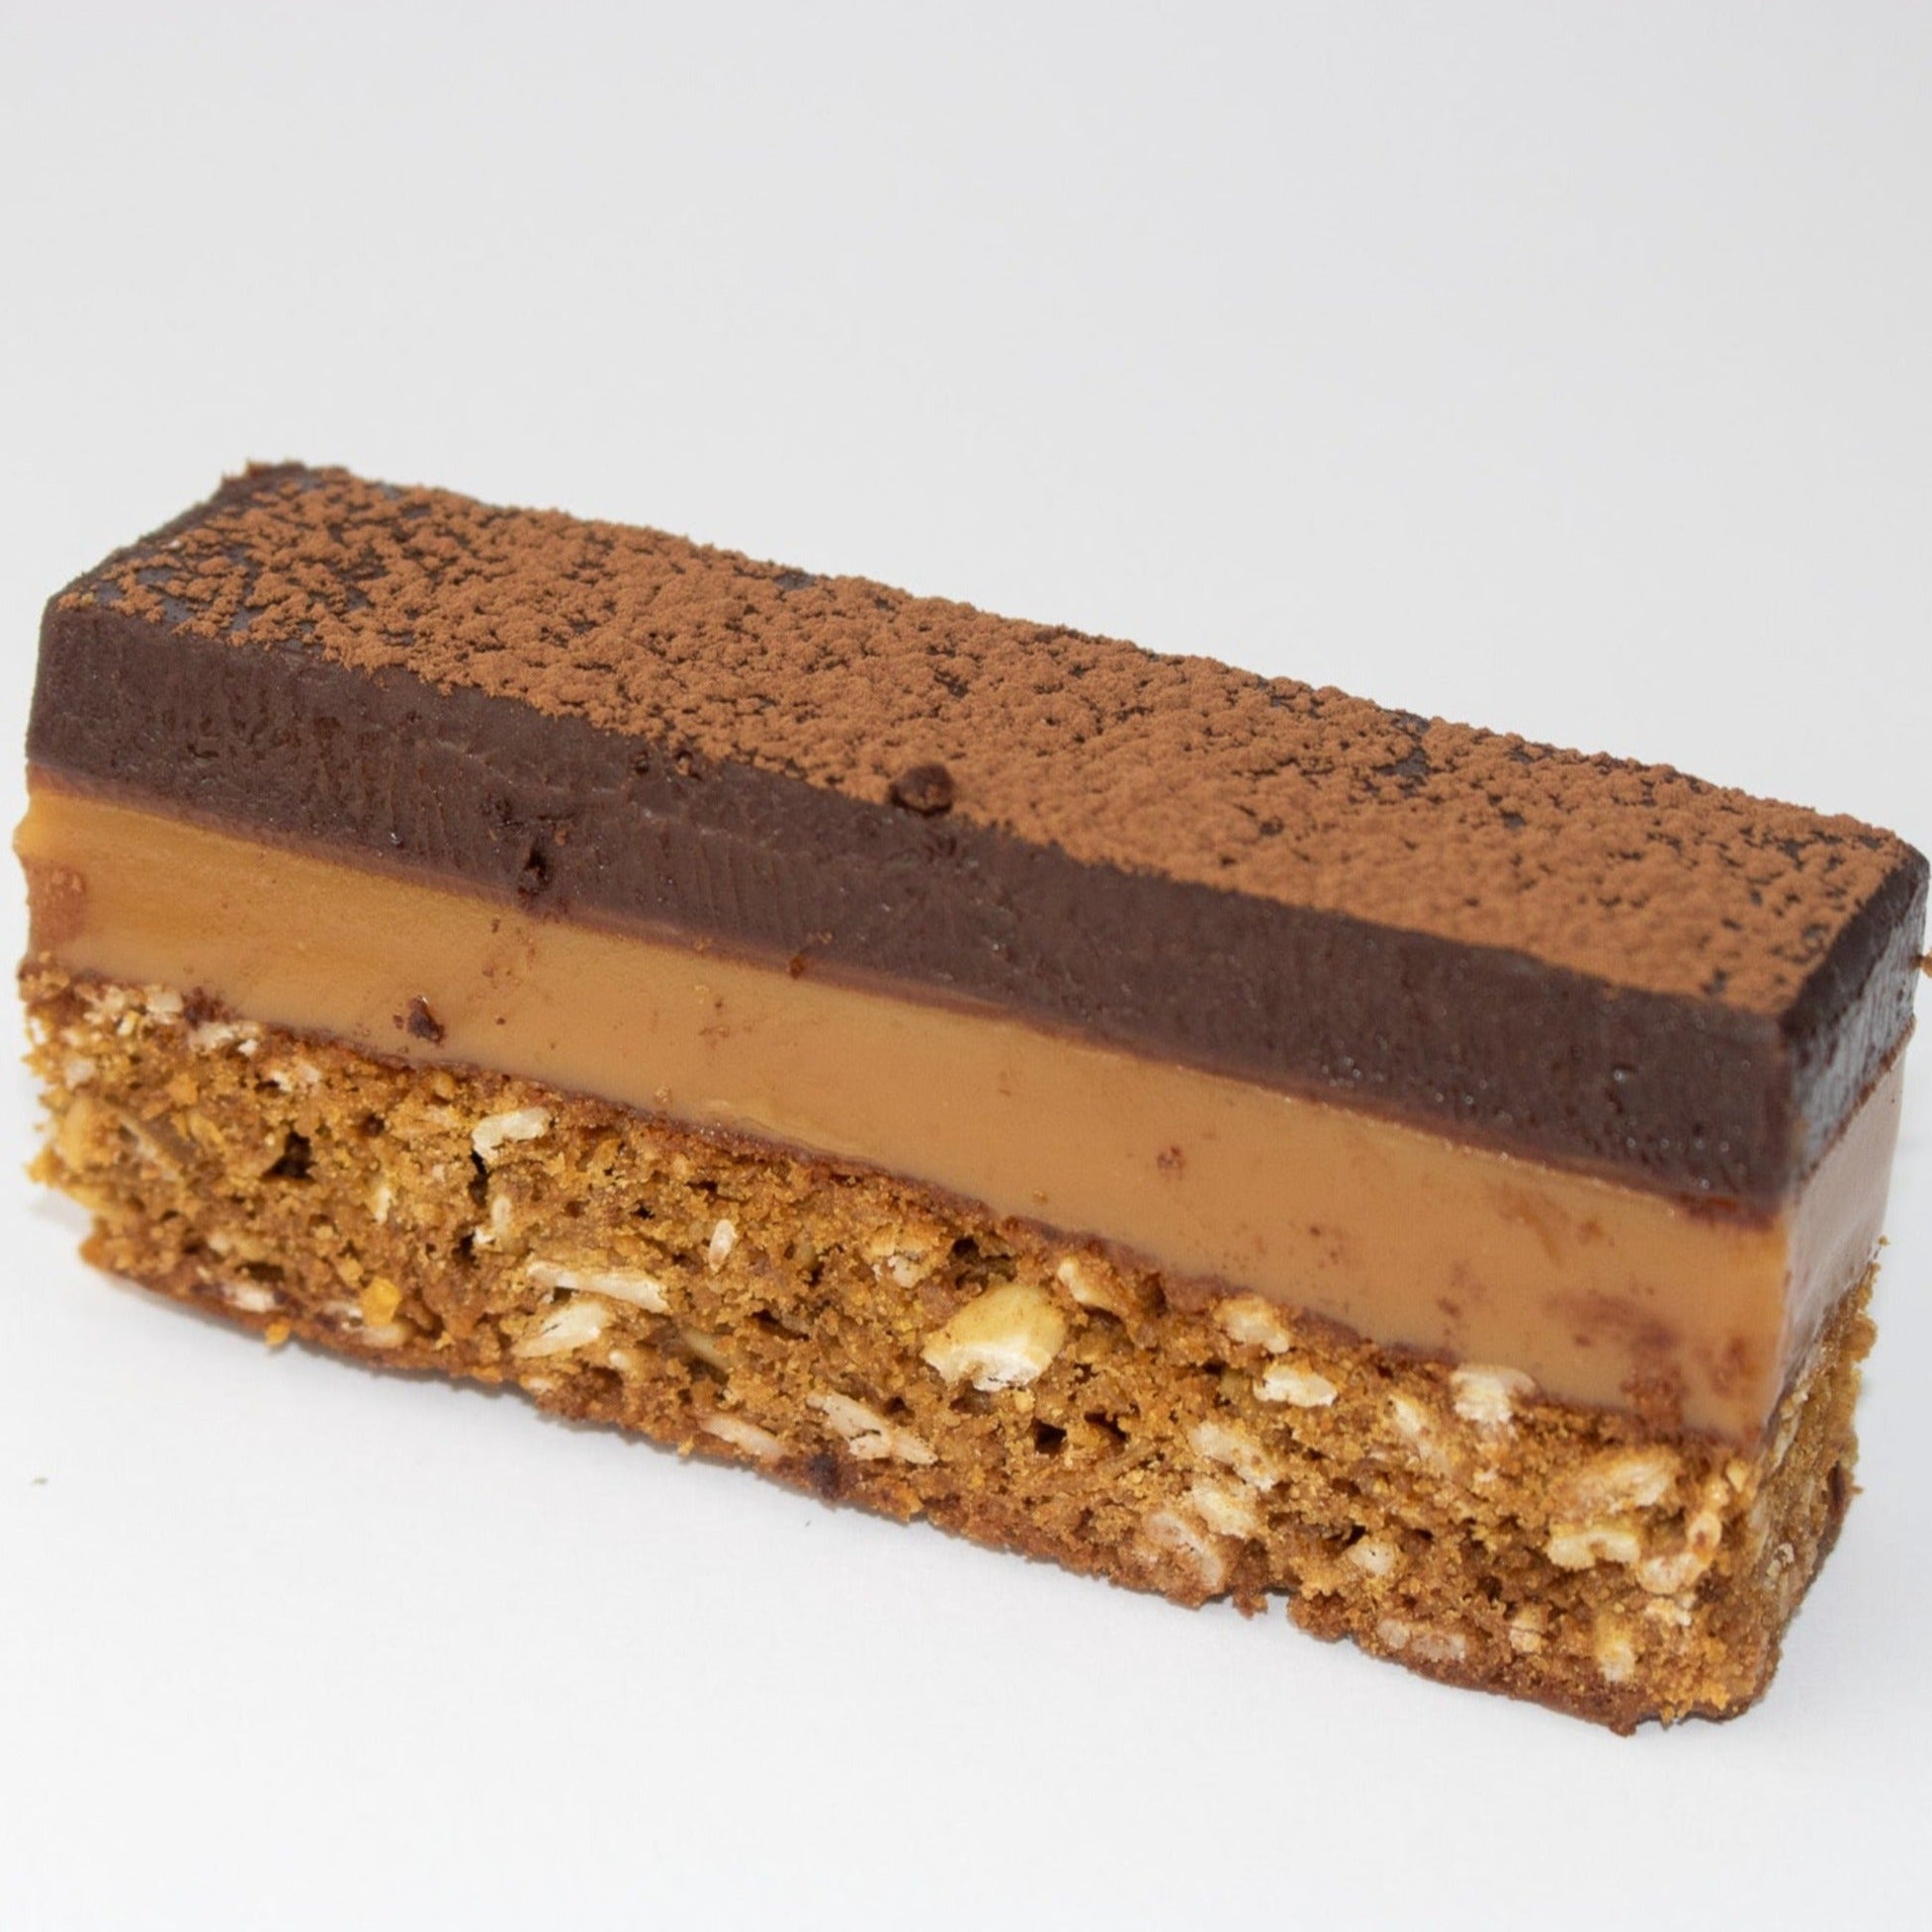 full image of a 3 layer slice. the bottom layer is an oaty biscuit. the middle layer is caramel. and at the top there is a thick layer of chocolate ganache